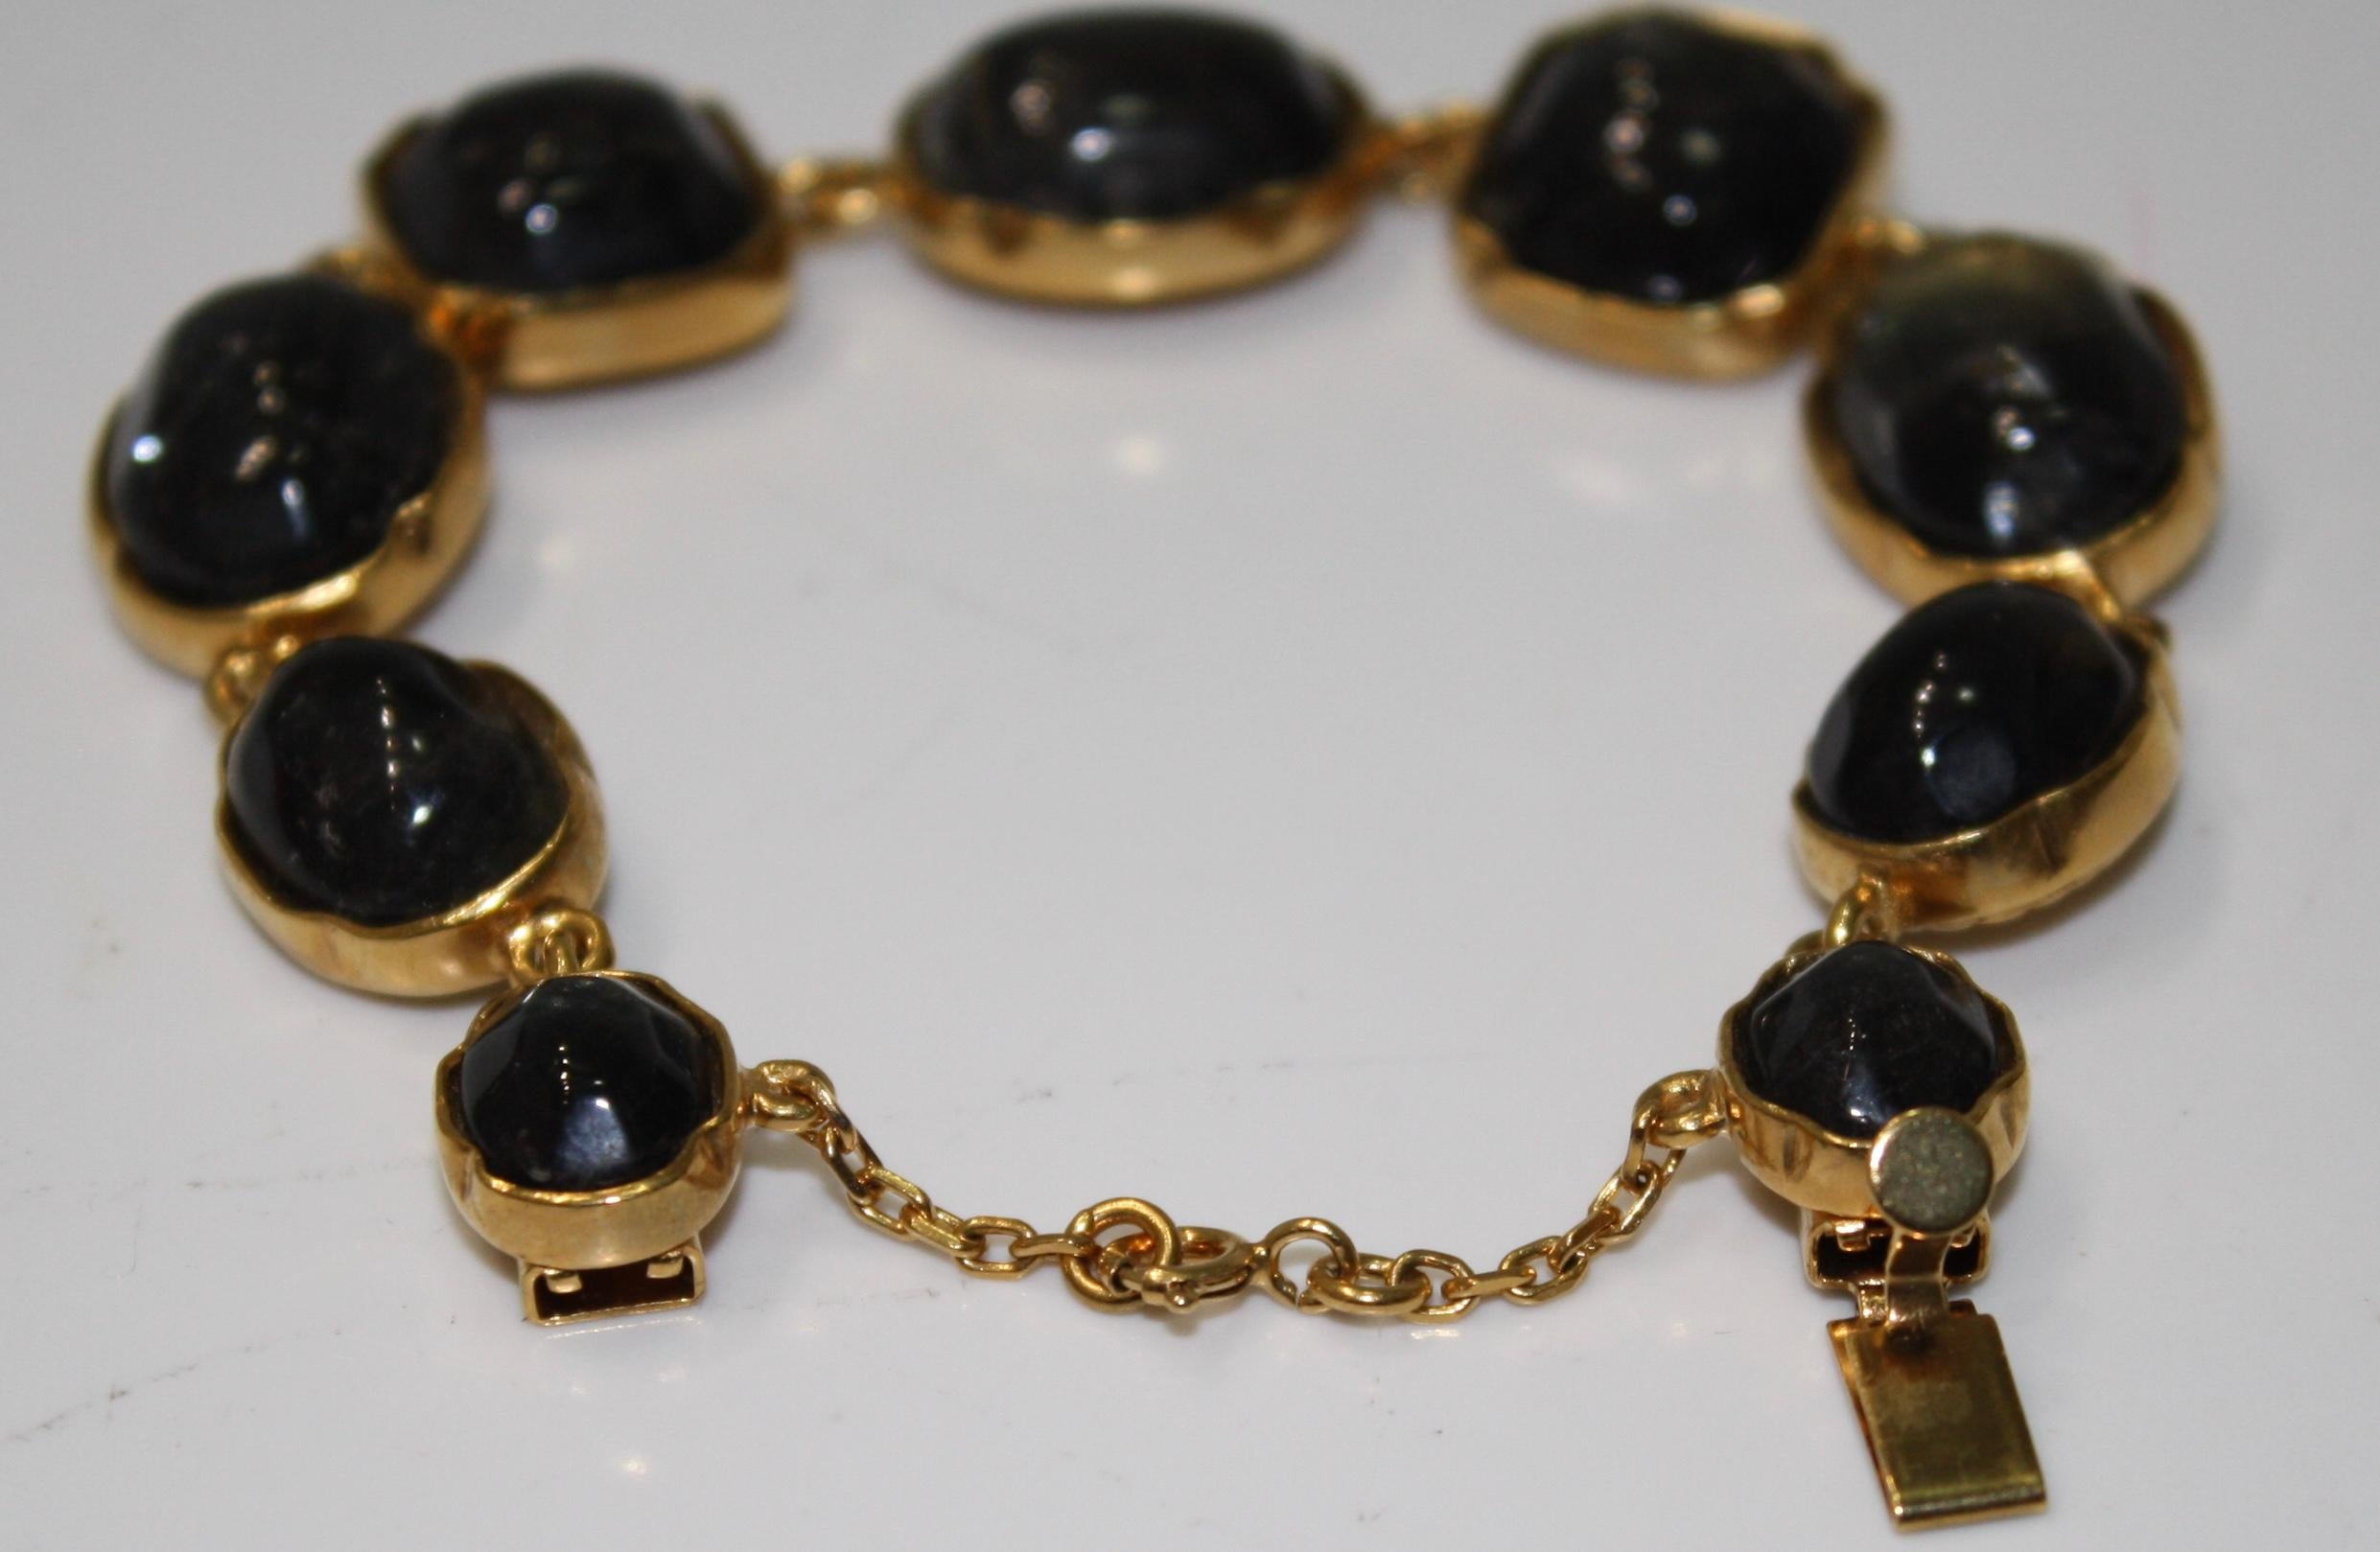 Hand tinted rock crystal in black set on 24Kt gilded bronze. Signature on the back. Security chain.